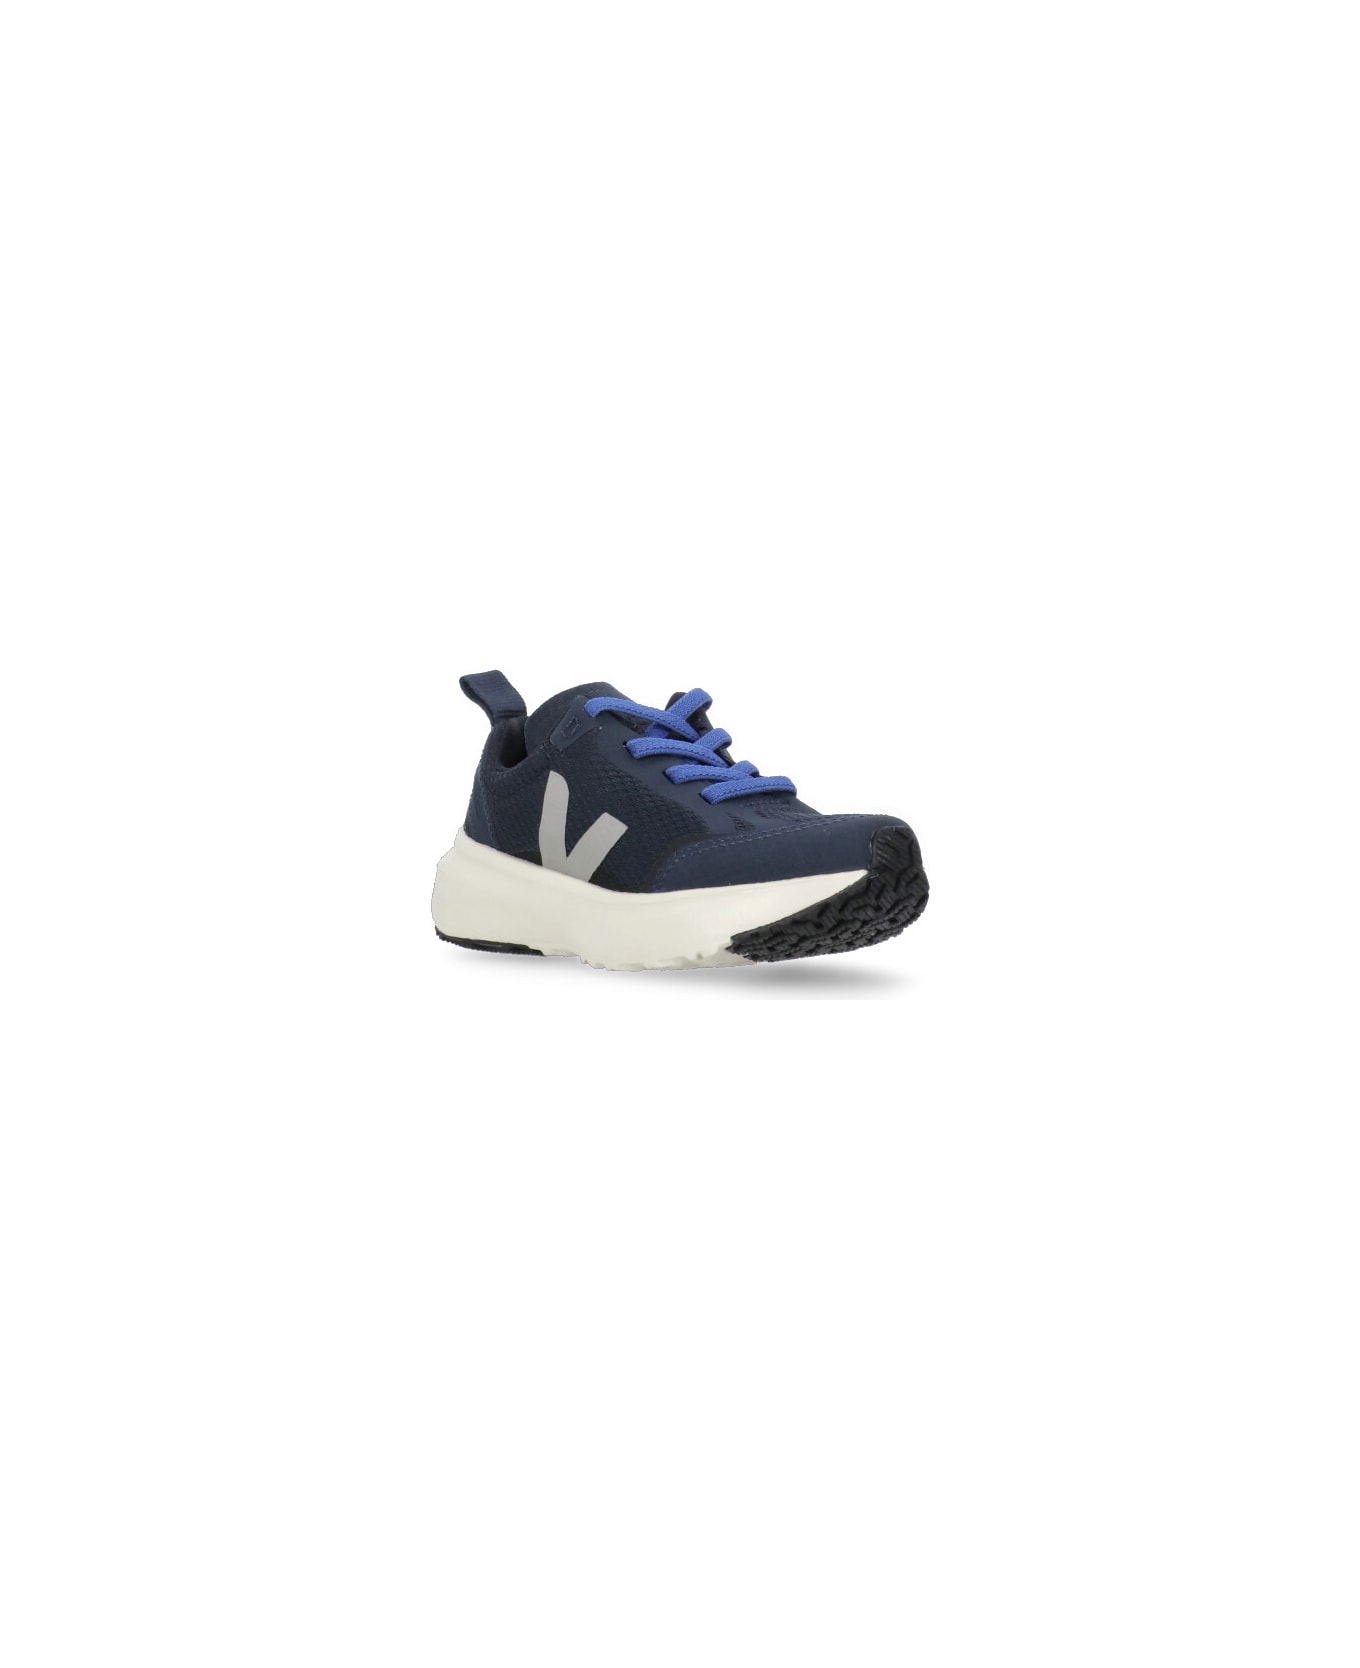 Veja Canary Sneakers - Blue